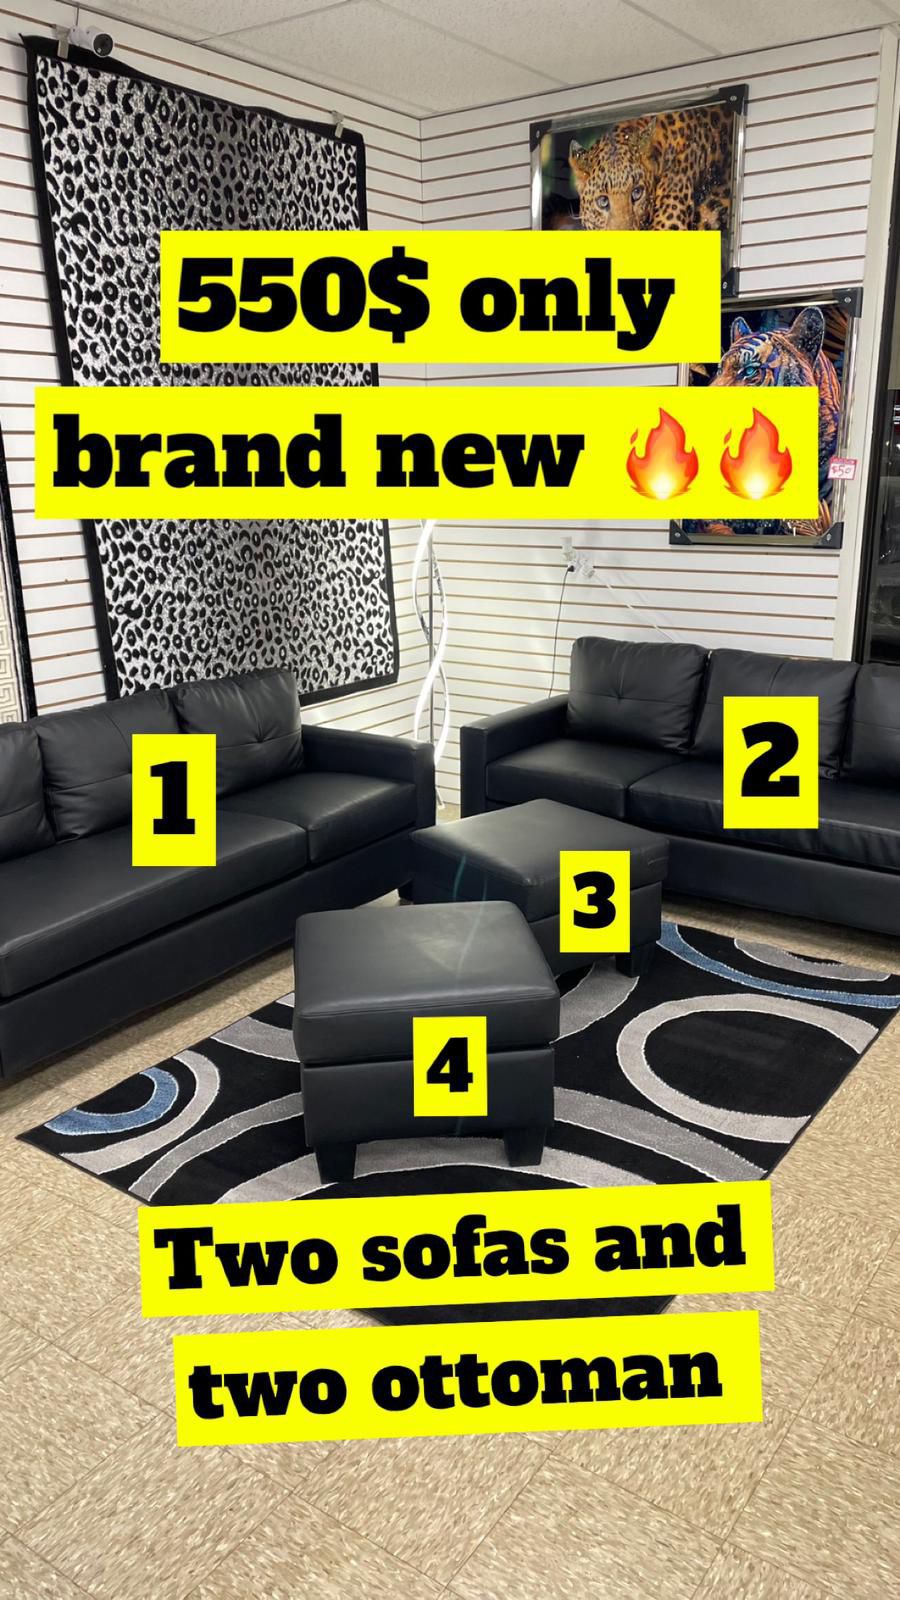 2 sofas and 2 ottoman brand new set $550  only available for pick up or delivery